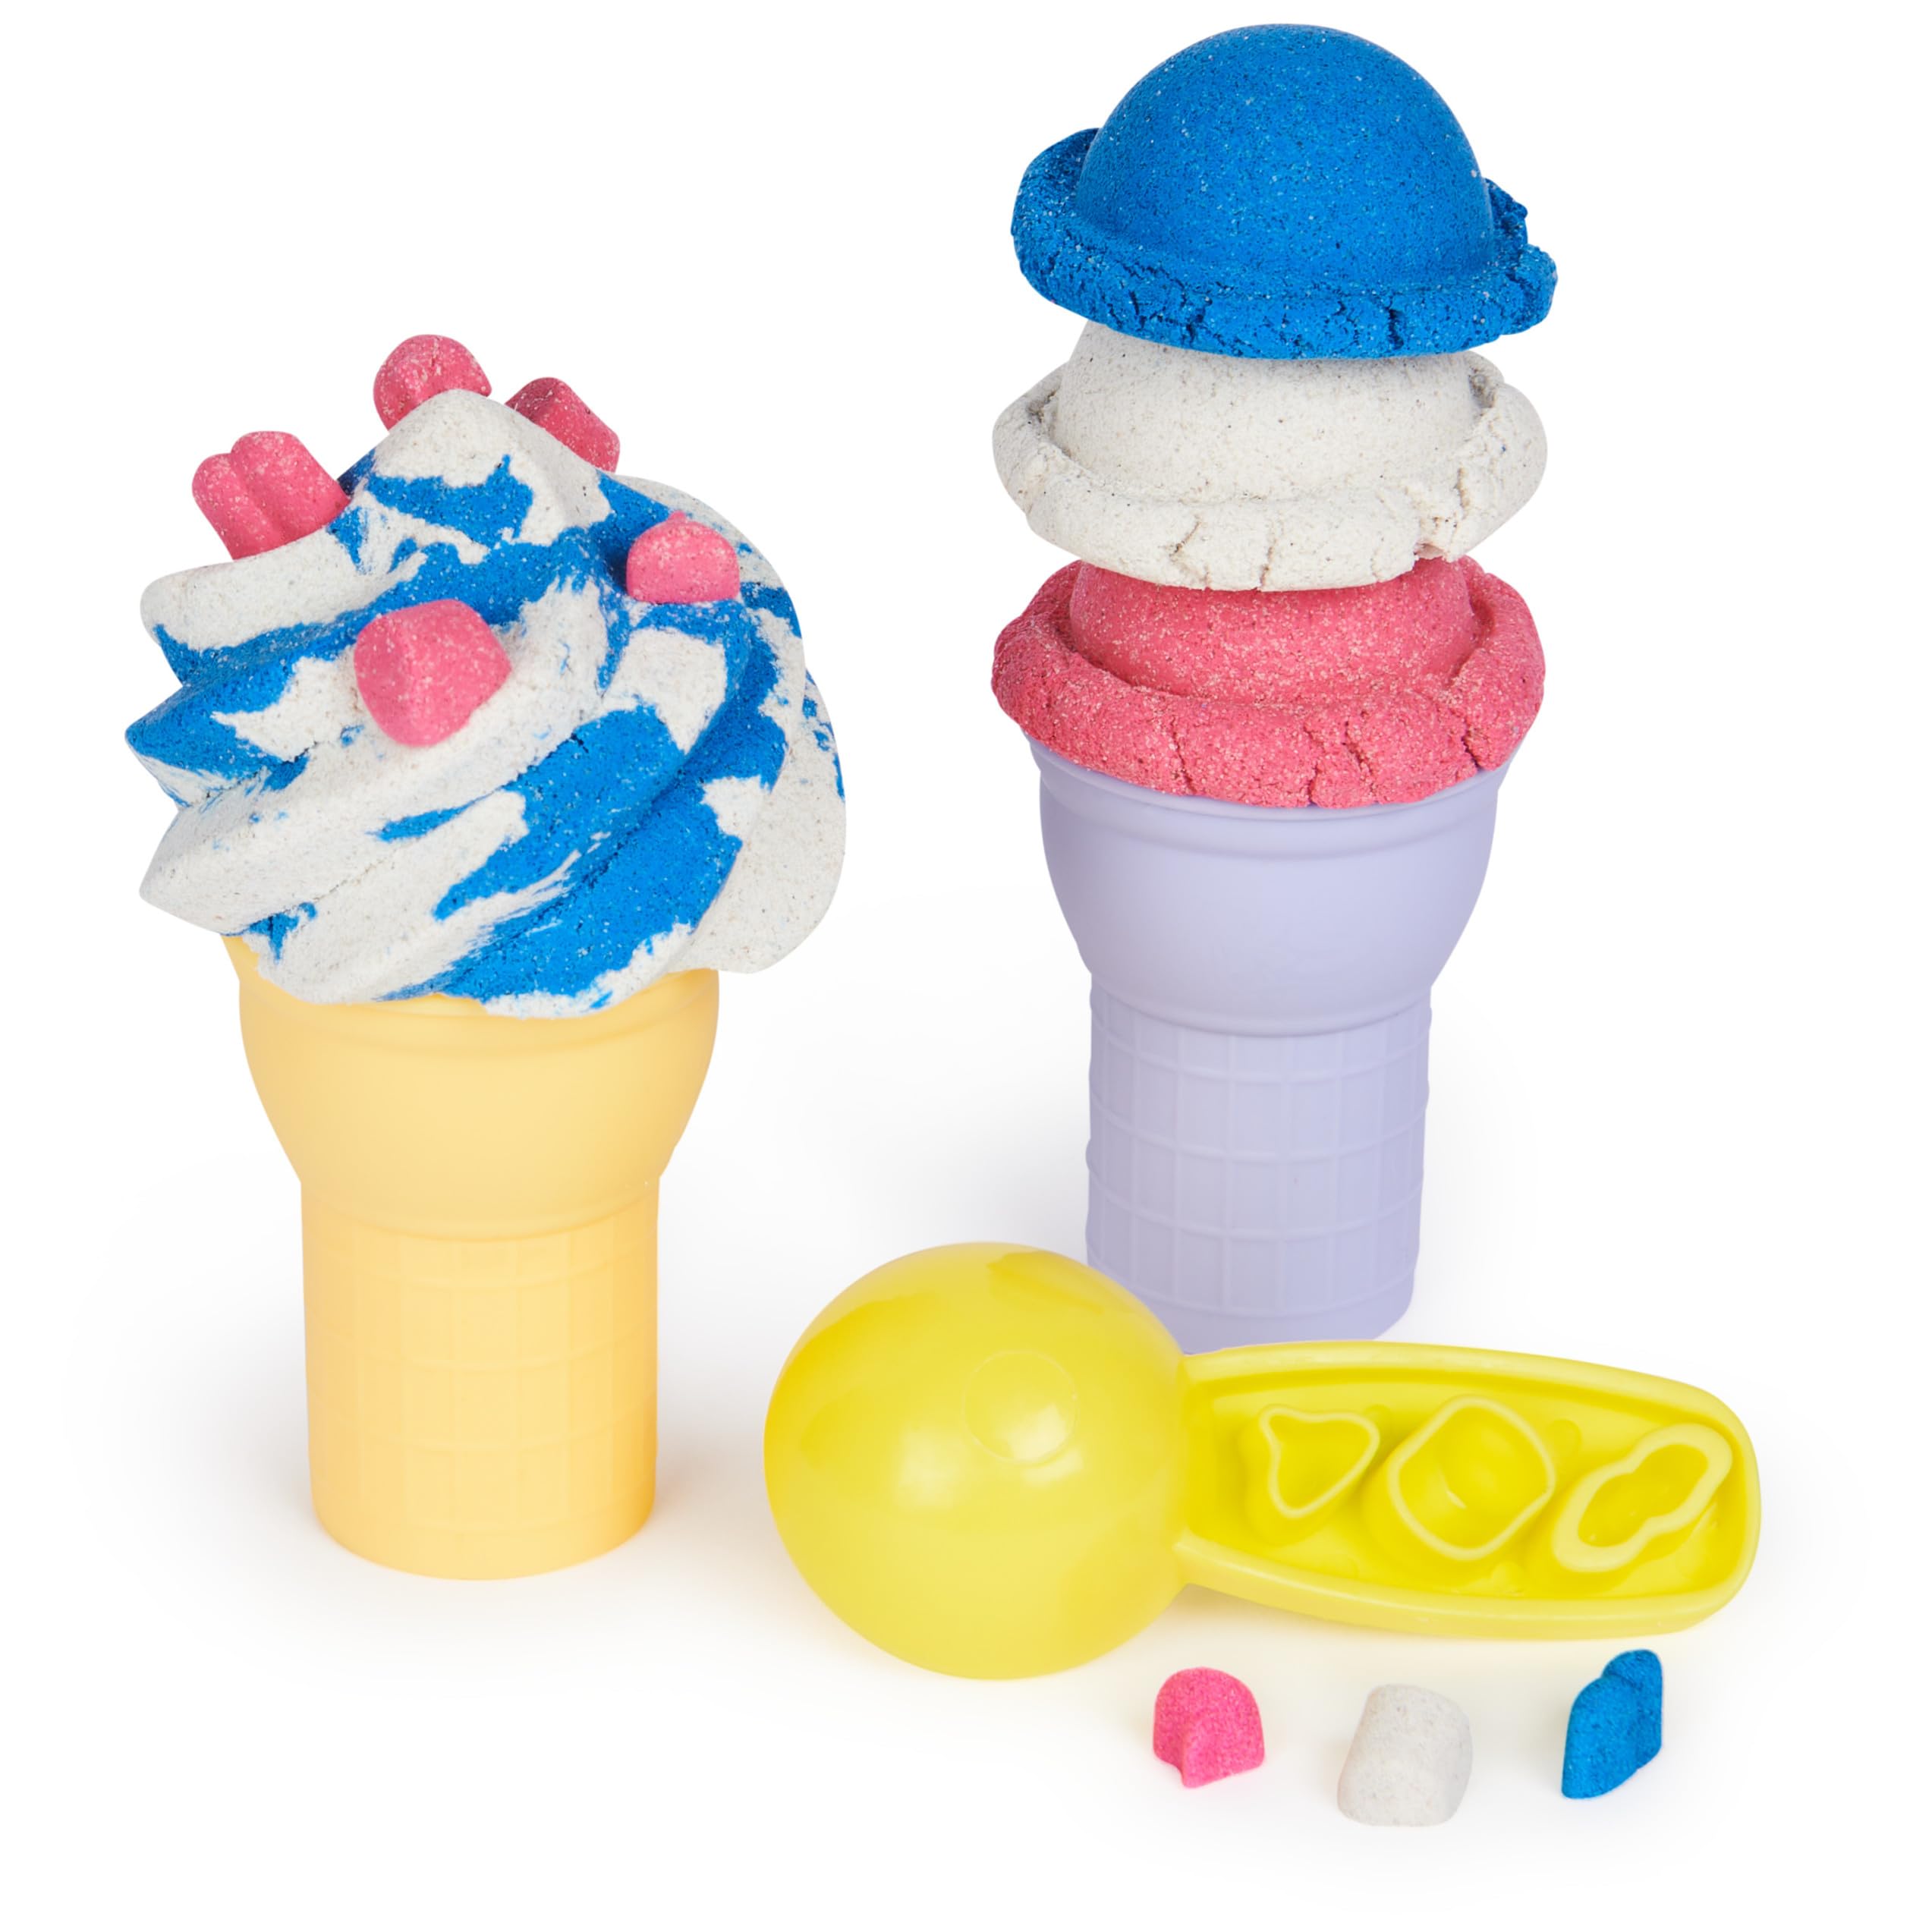 Kinetic Sand, Soft Serve Station with 14oz of Play Sand (Blue, Pink and White), 2 Ice Cream Cones and 2 Tools, Sensory Toys for Kids Aged 5 and up